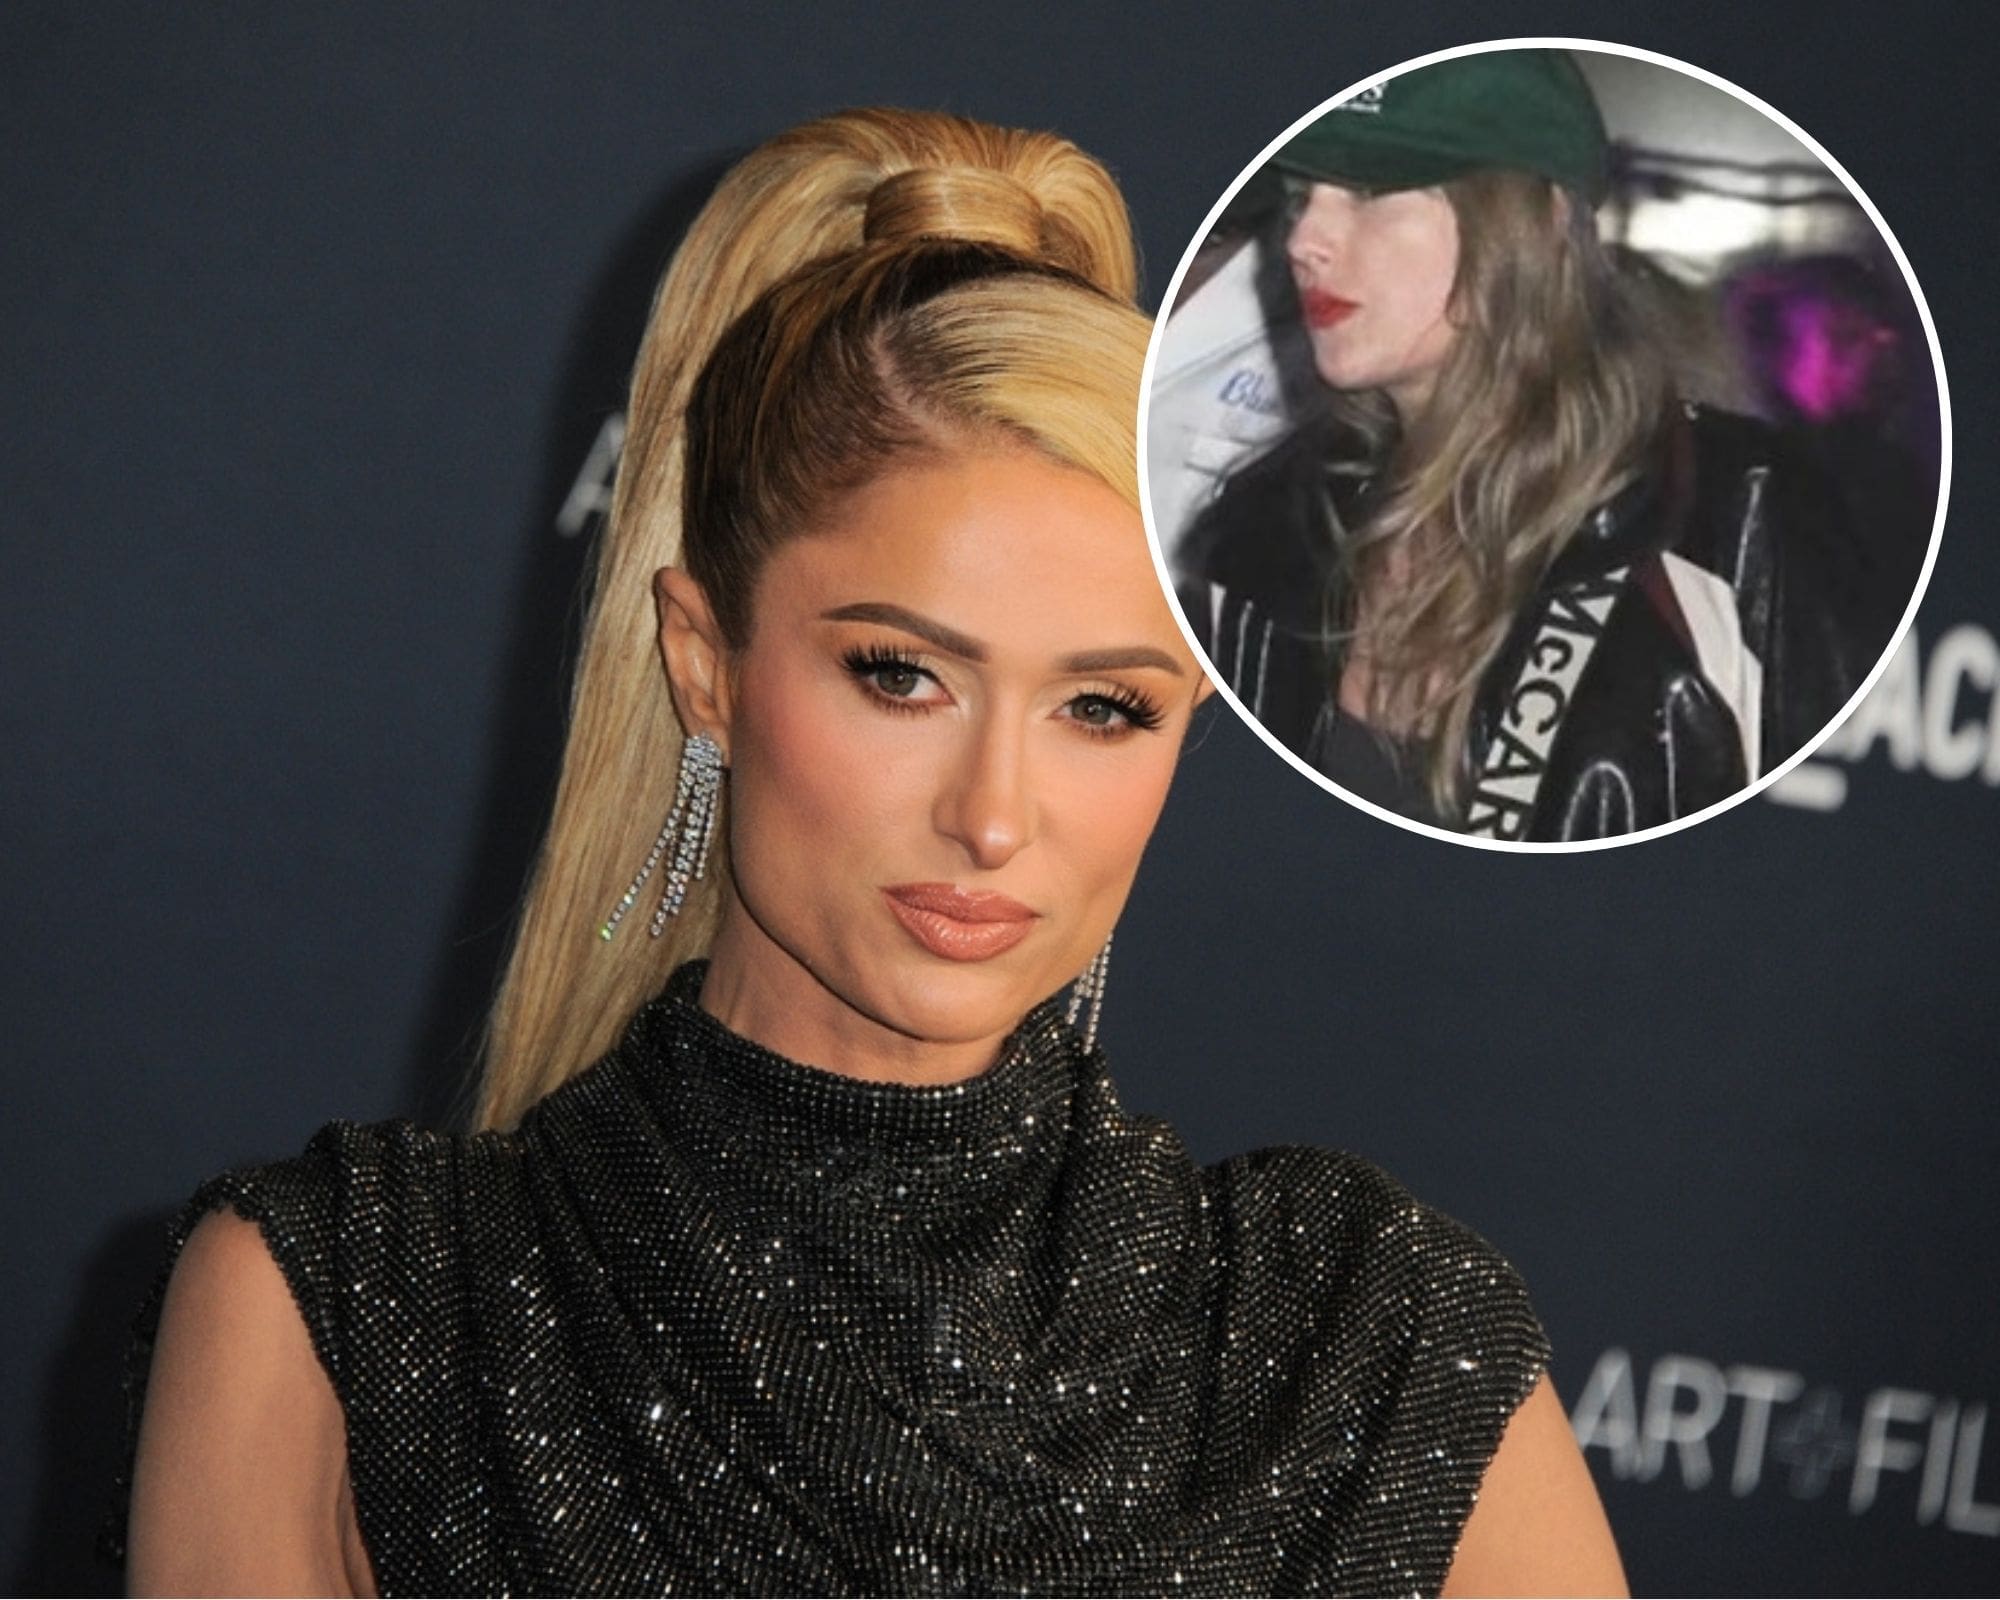 Paris Hilton Kicked Out of VIP Area at Coachella to Make Room for Taylor Swift